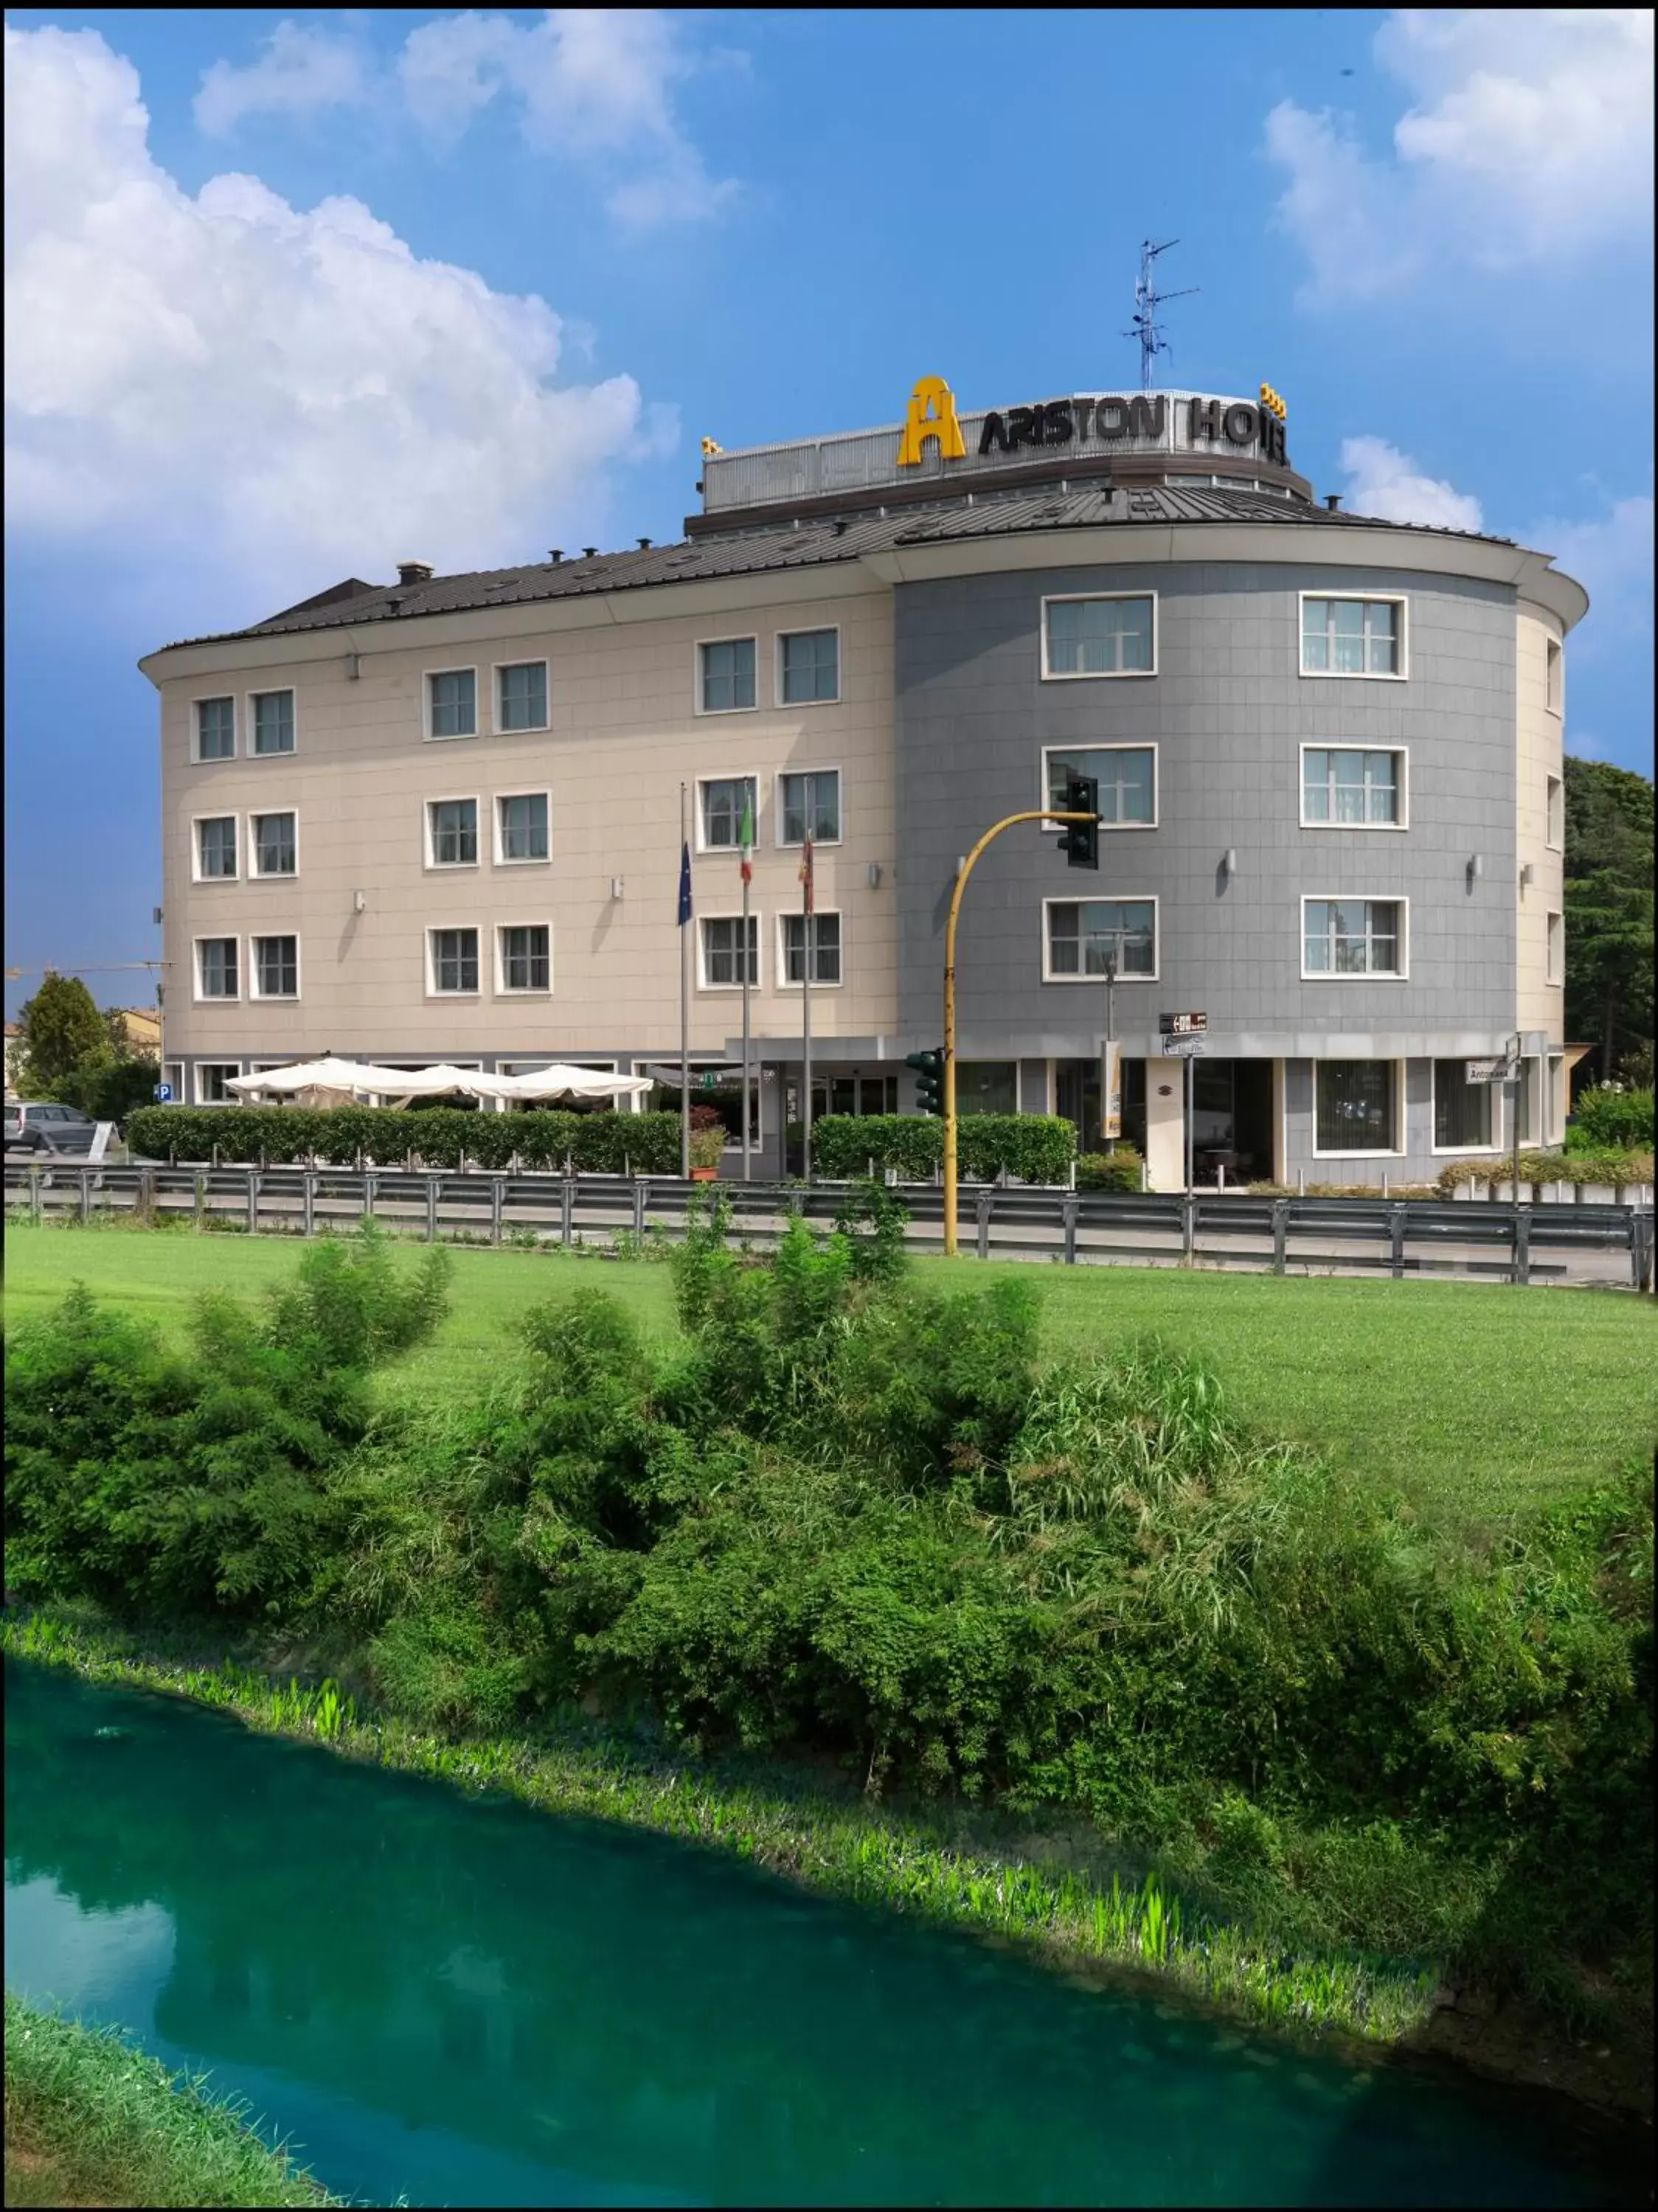 Off site, Property Building in Hotel Ariston